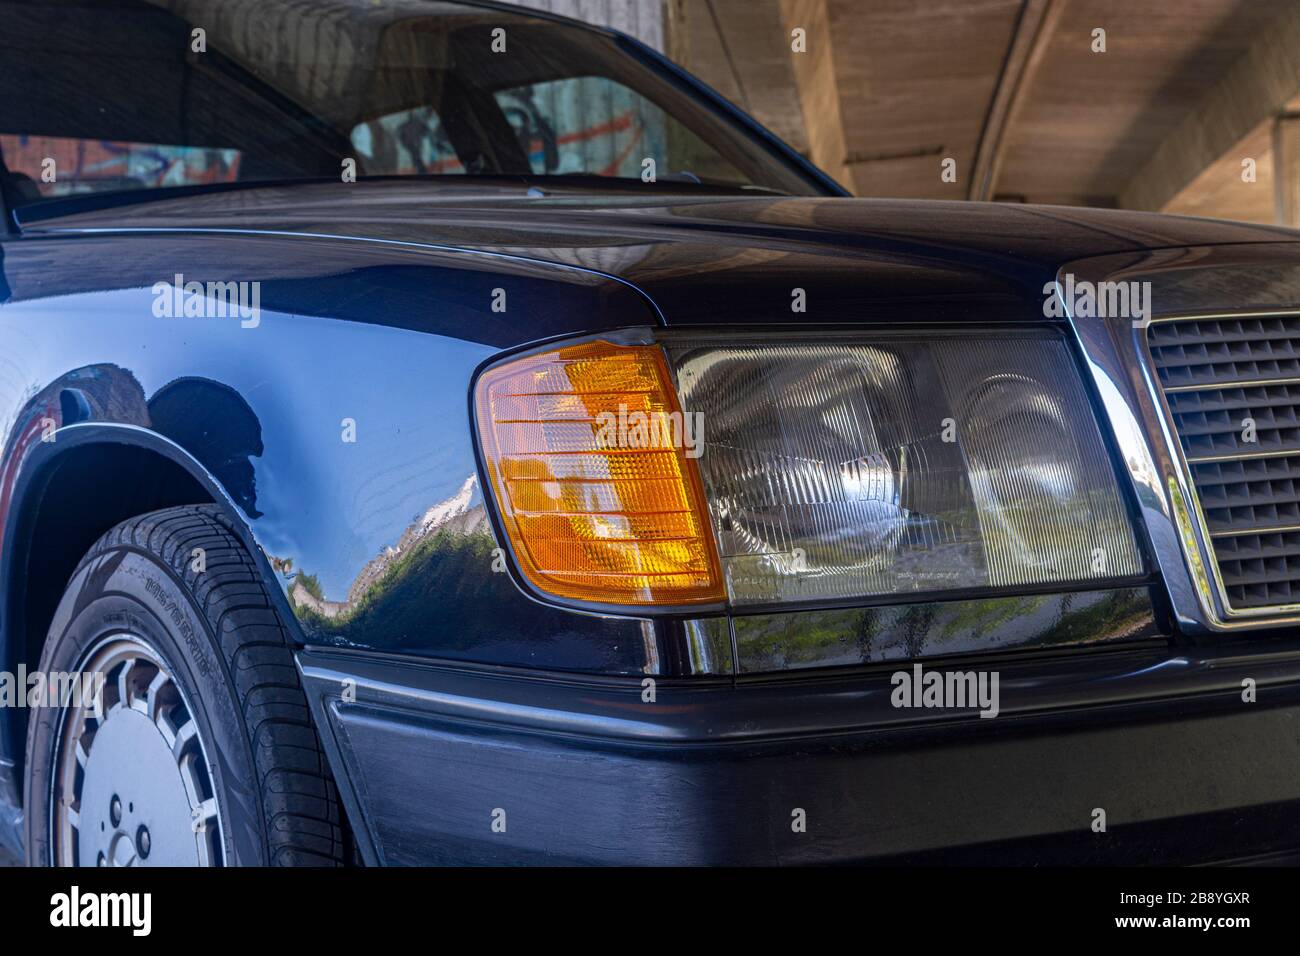 car front, headlights, turntables, wheel close up Stock Photo